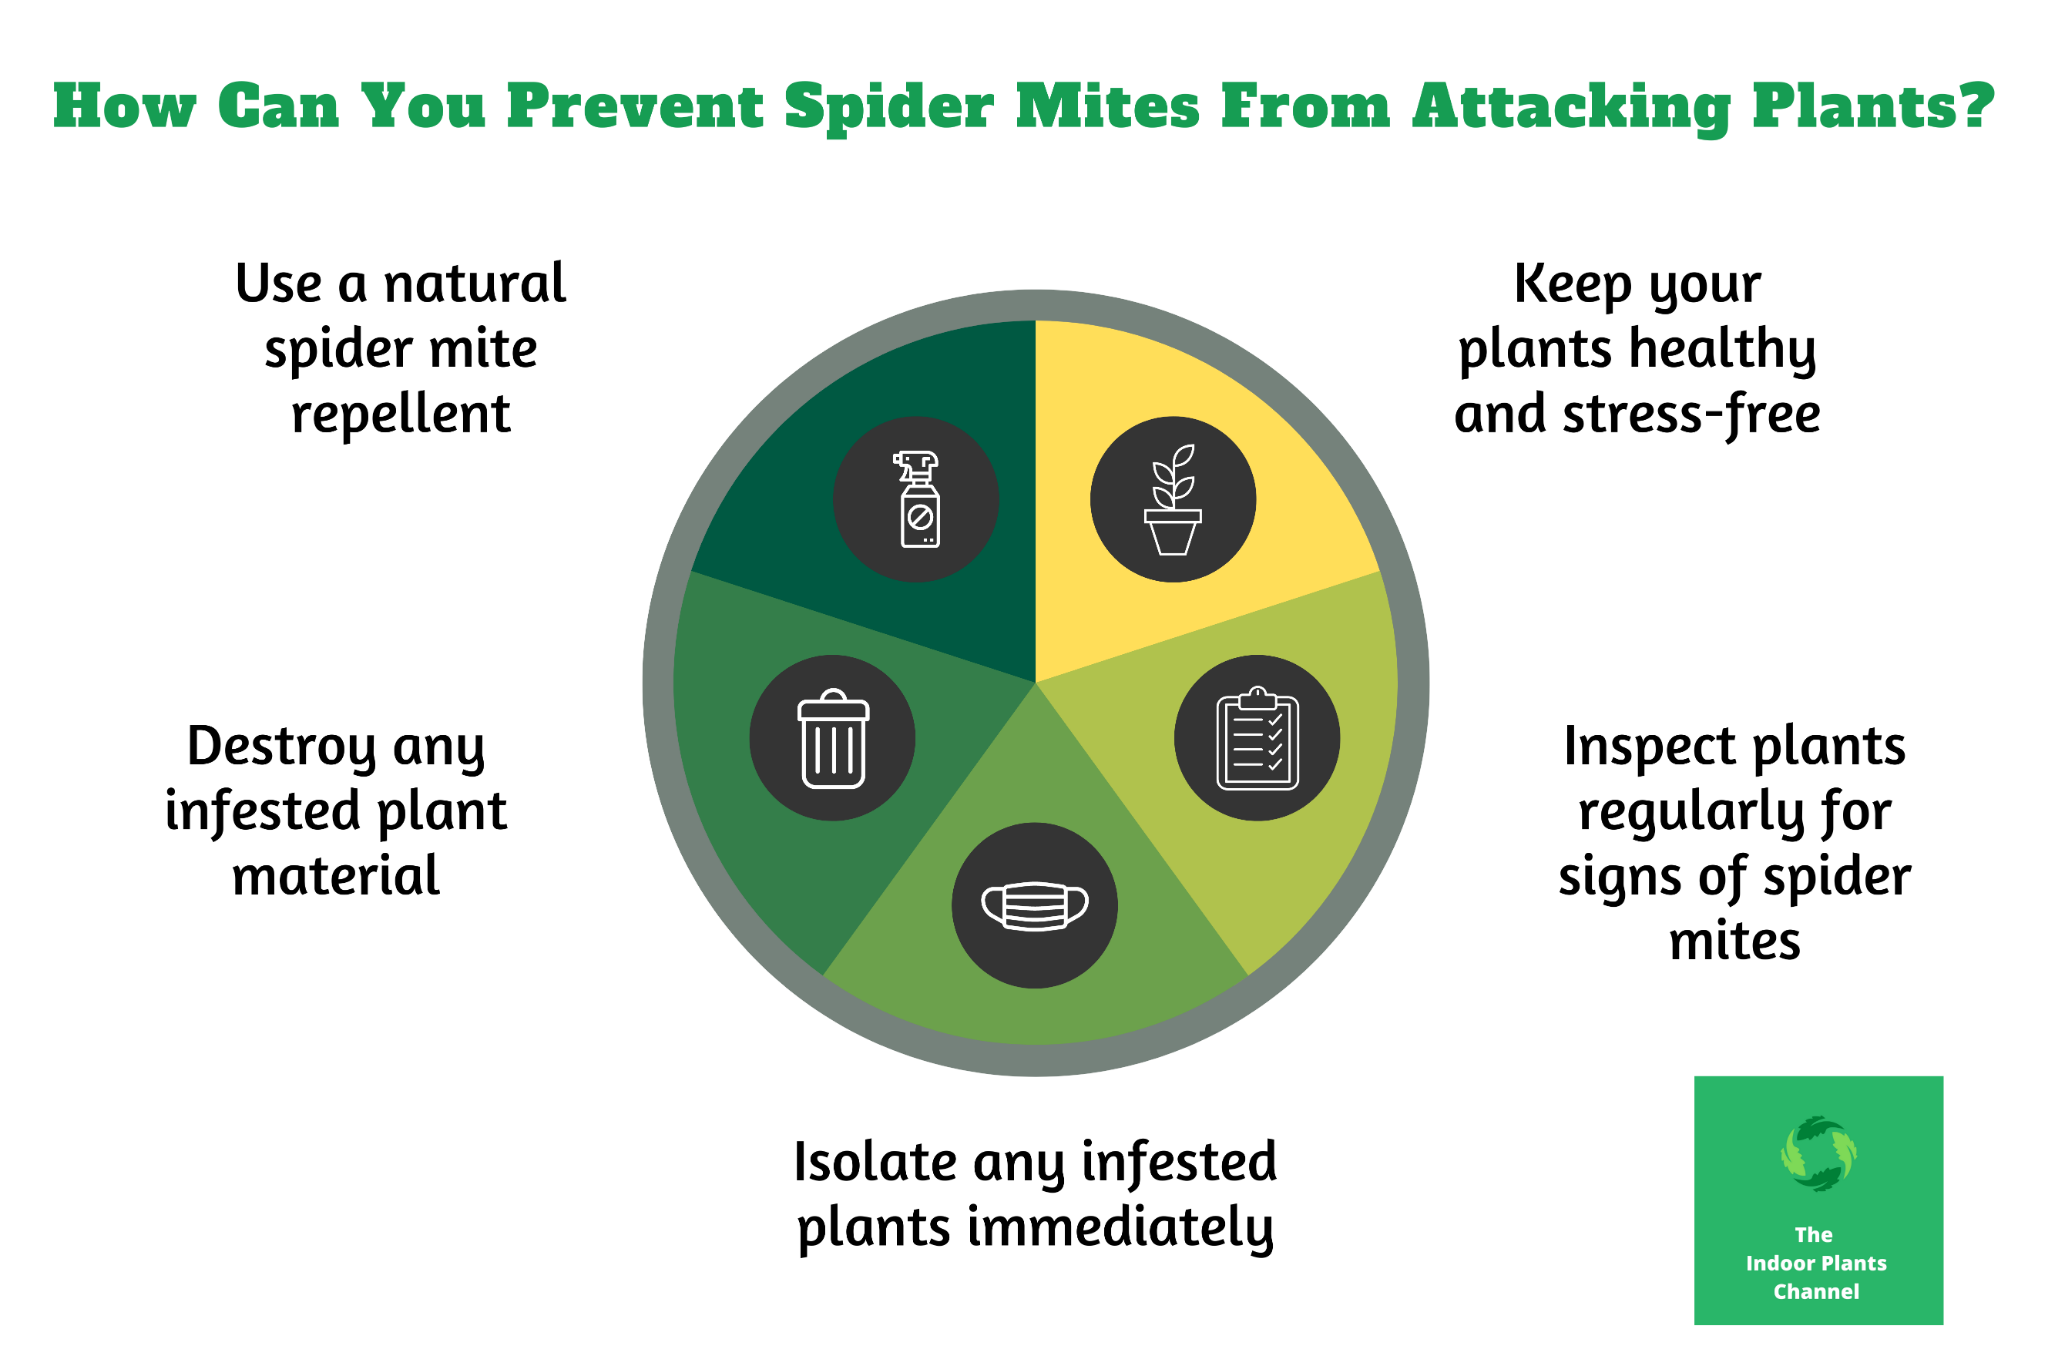 INFOGRAPHIC : How Can You Prevent Spider Mites From Infesting Your Plants?